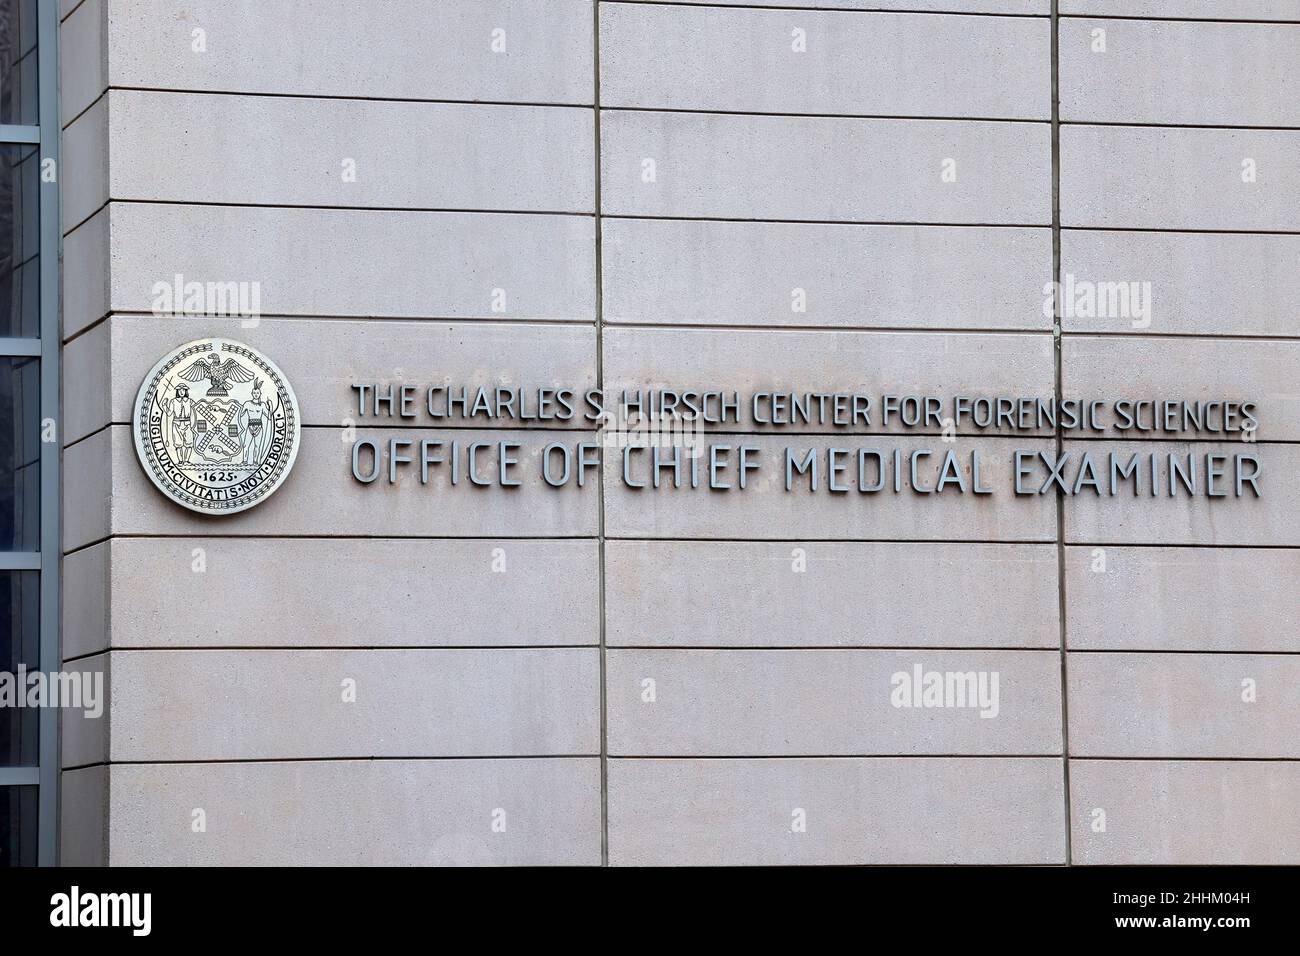 NYC Office of Chief Medical Examiner, 421 e 26th St, New York, NY. Il Charles S. Hirsch Center for Forensic Sciences di Manhattan. Foto Stock